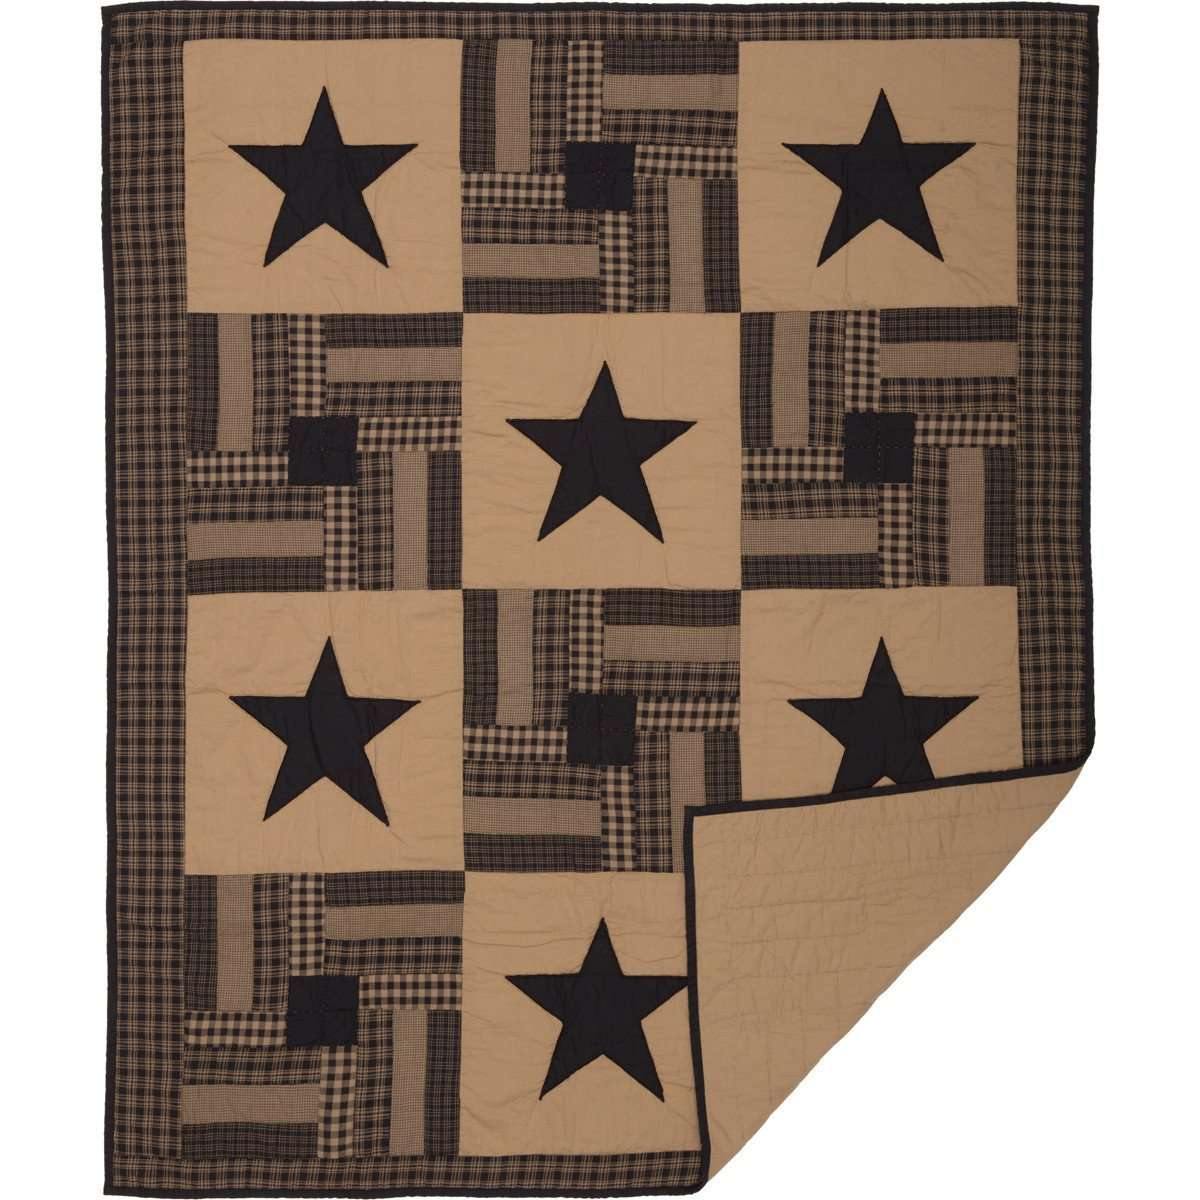 Black Check Star Quilted Throw 60x50 VHC Brands online